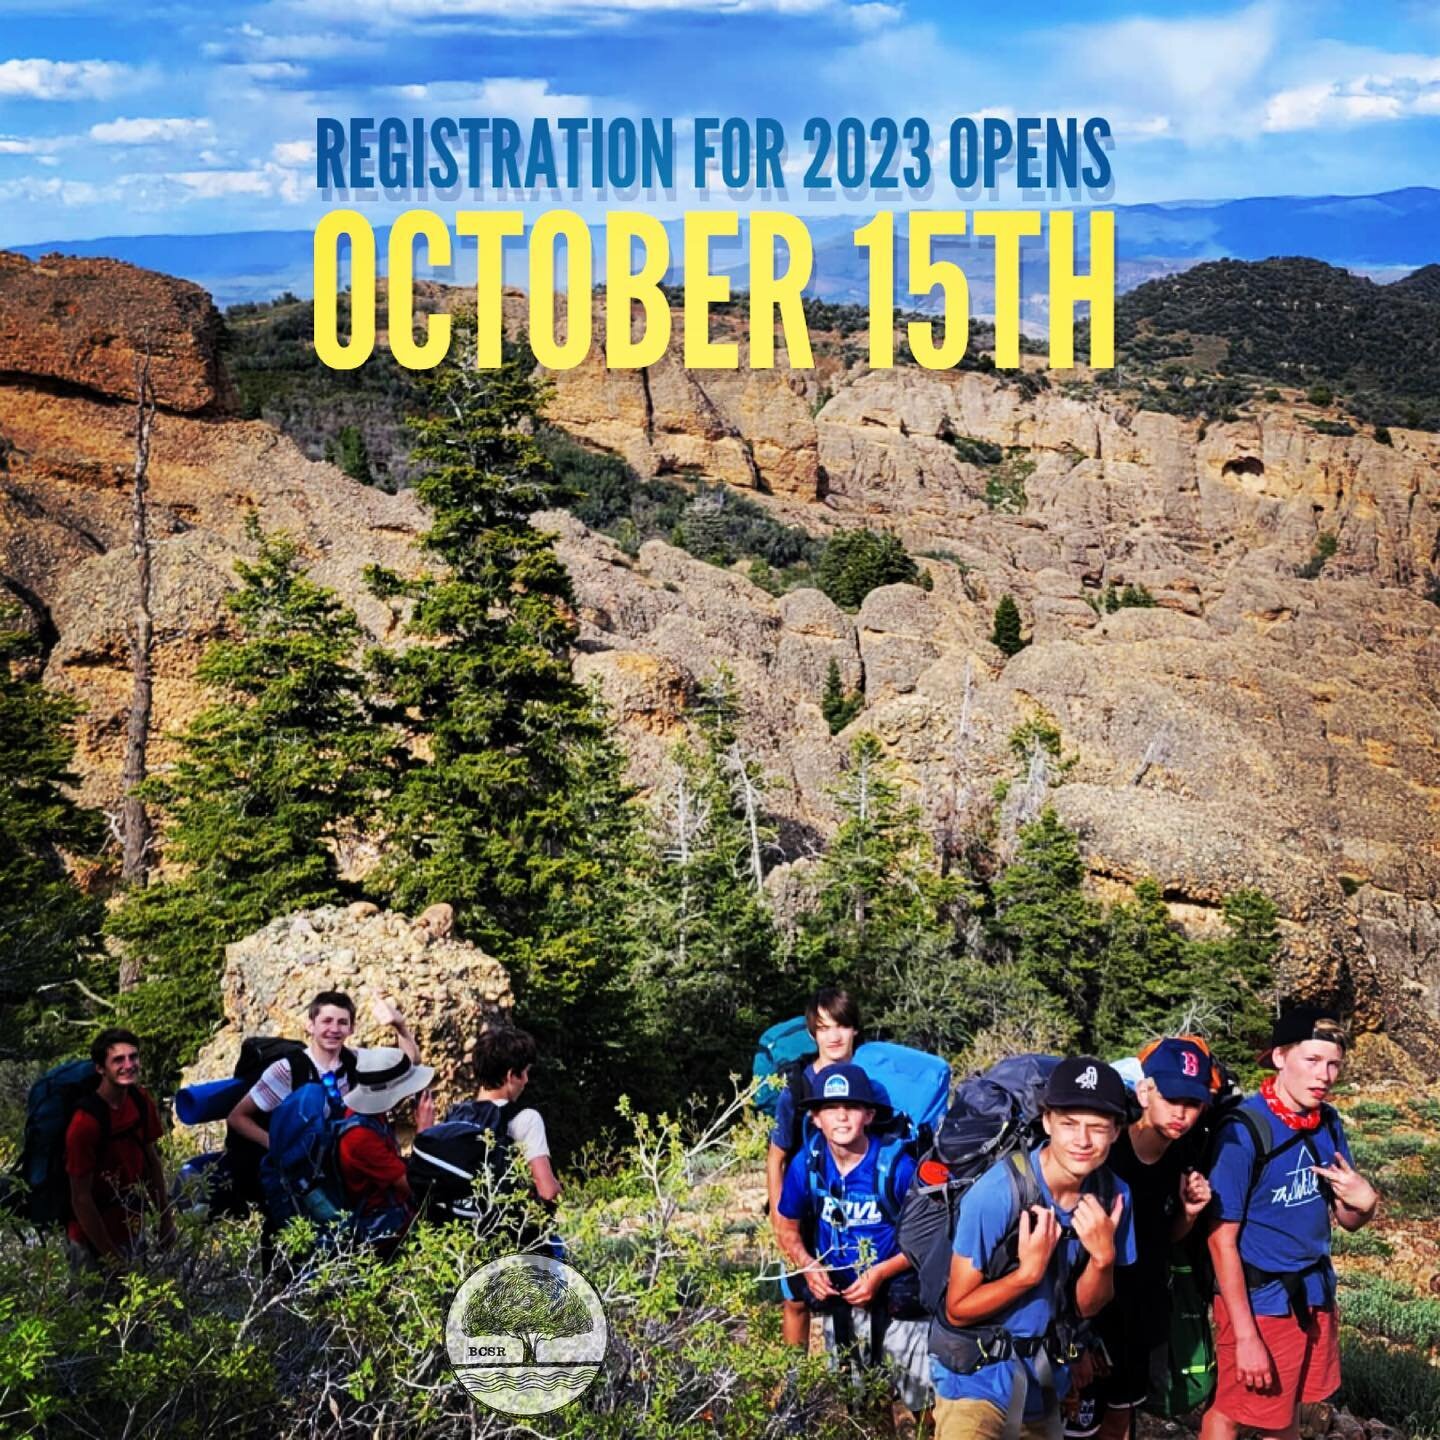 Our summer 2023 session dates, rates, and registration link will go live on October 15th at serviceranch.org. Don&rsquo;t forget to sign up. We hope to see you back at the ranch.